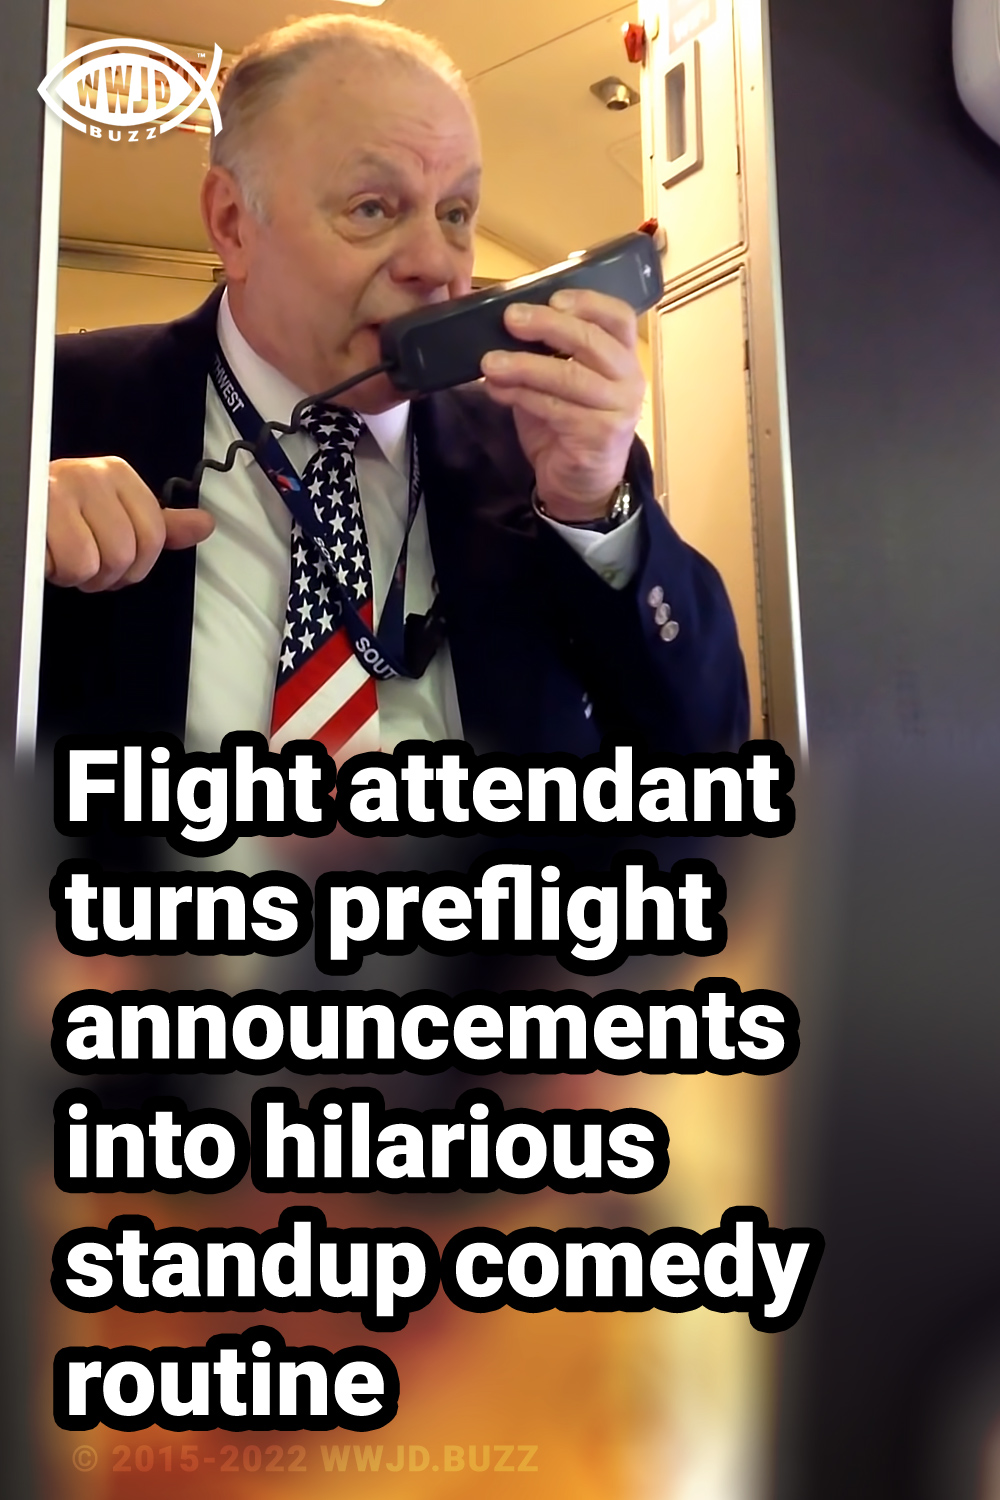 Flight attendant turns preflight announcements into hilarious standup comedy routine